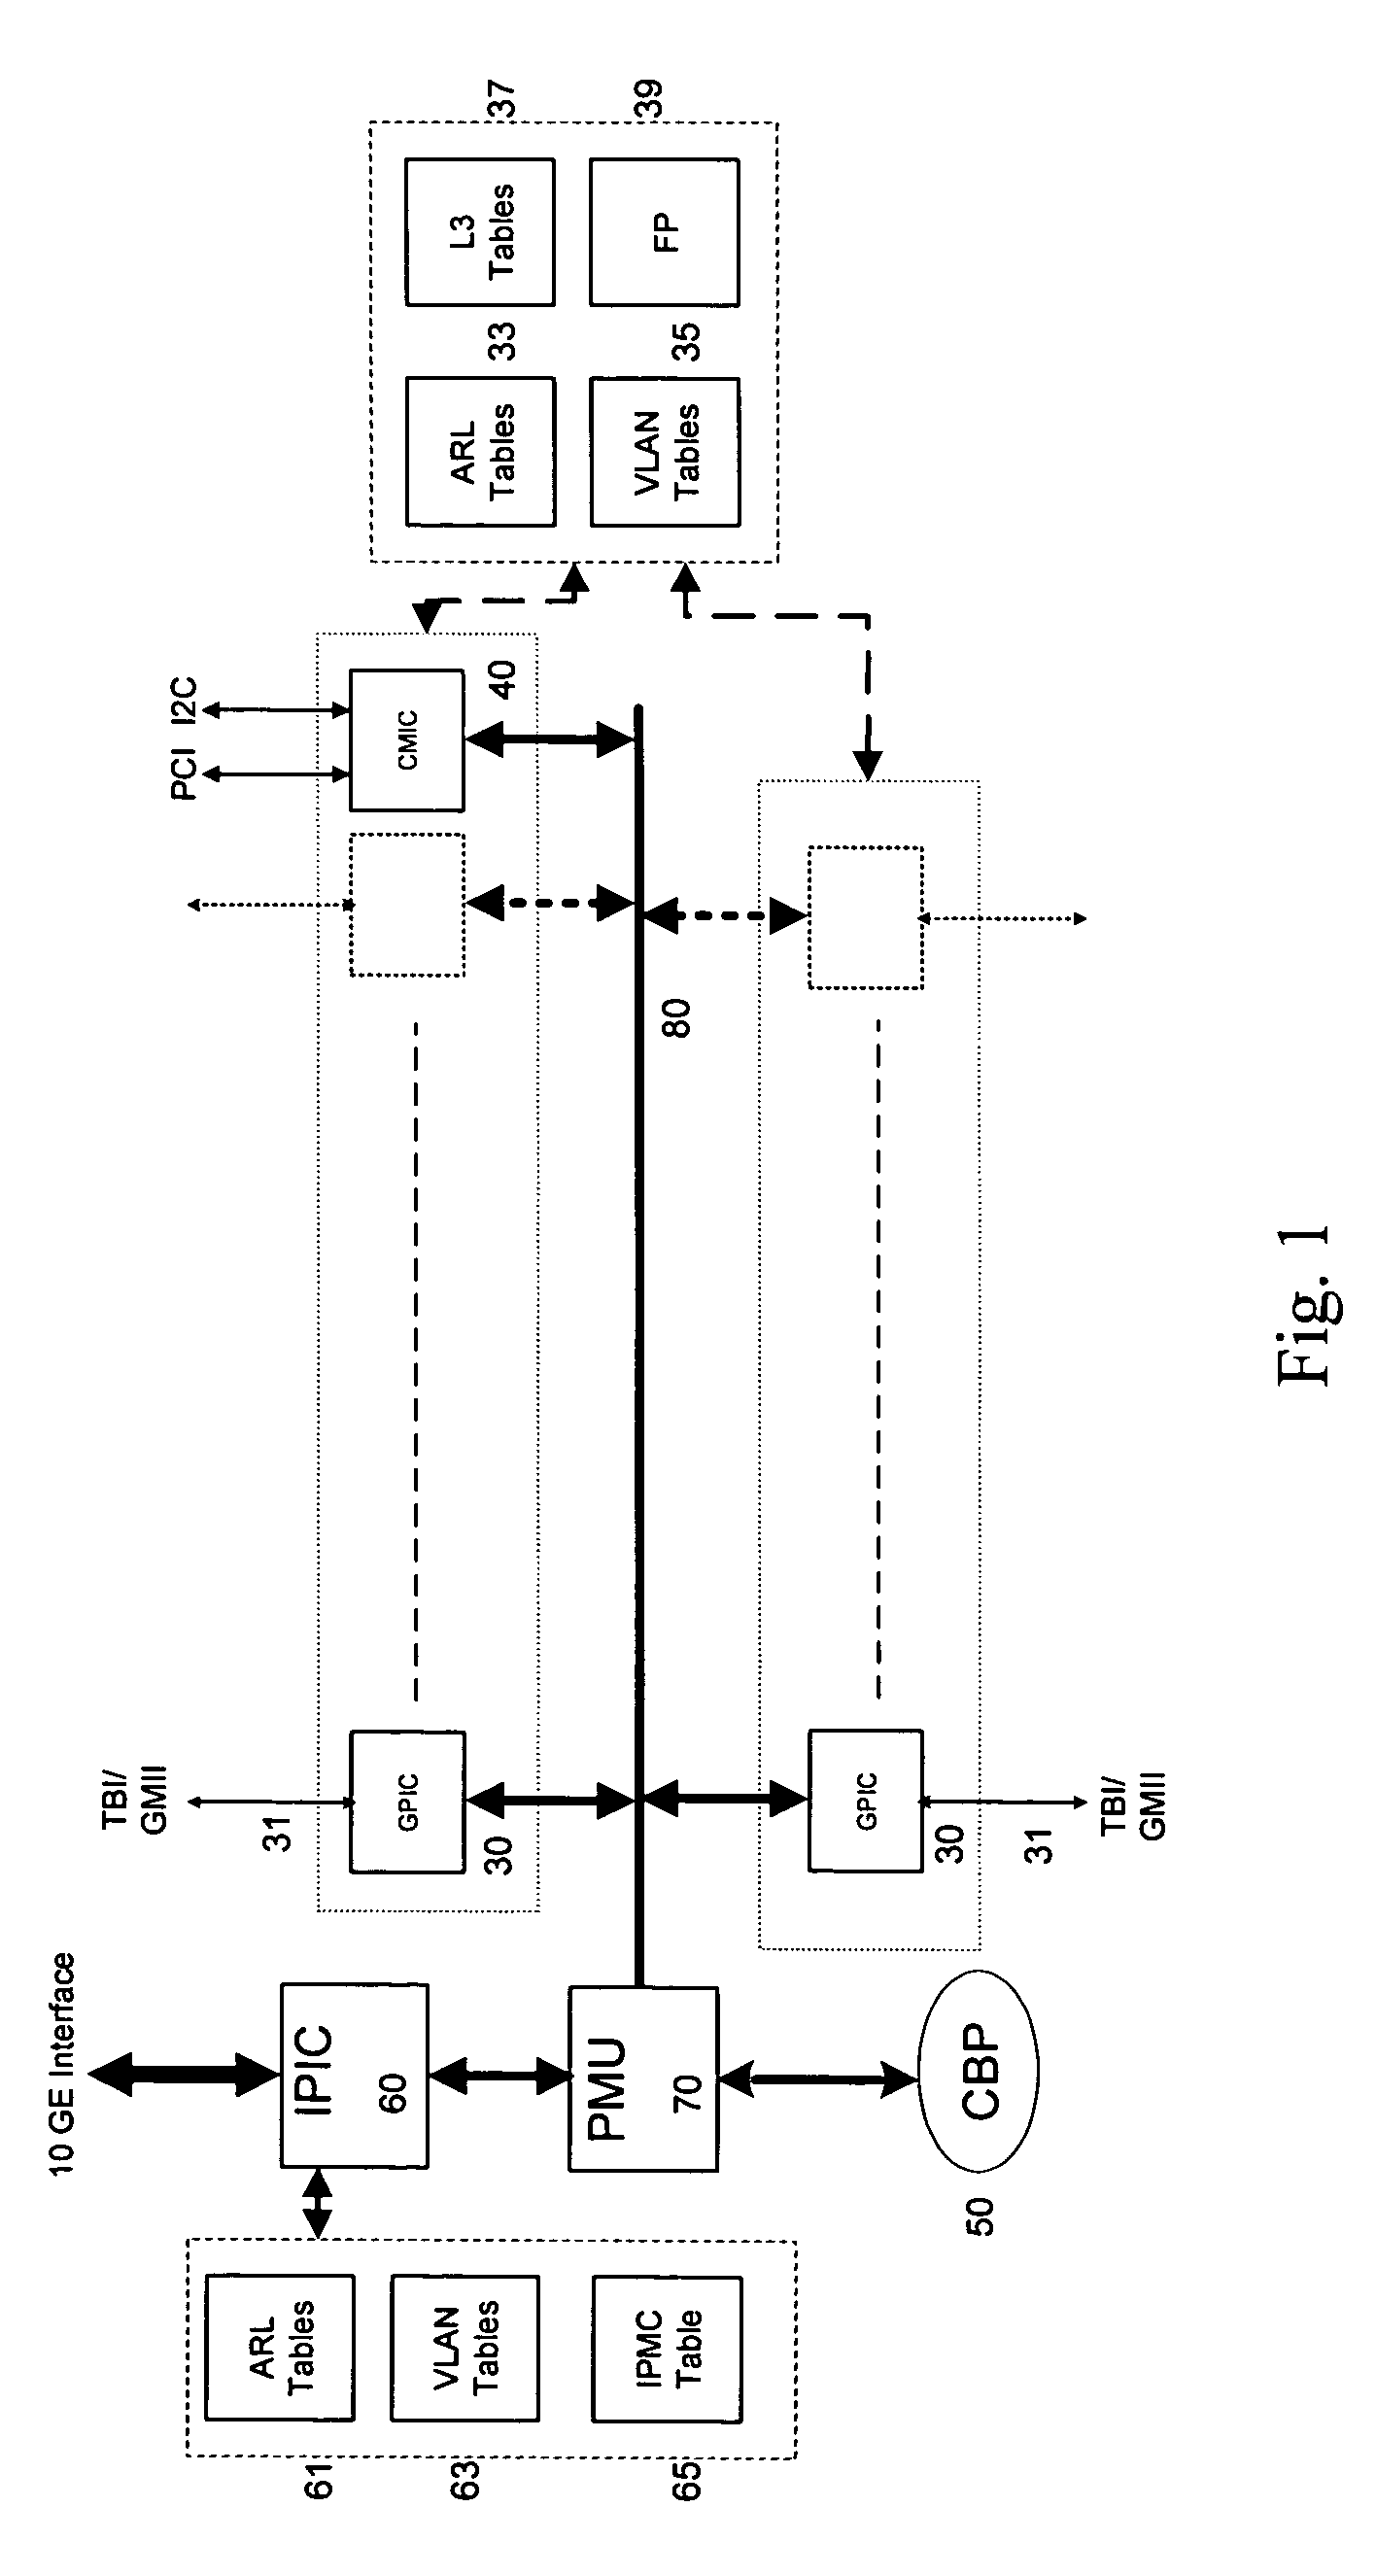 Field processor for a network device